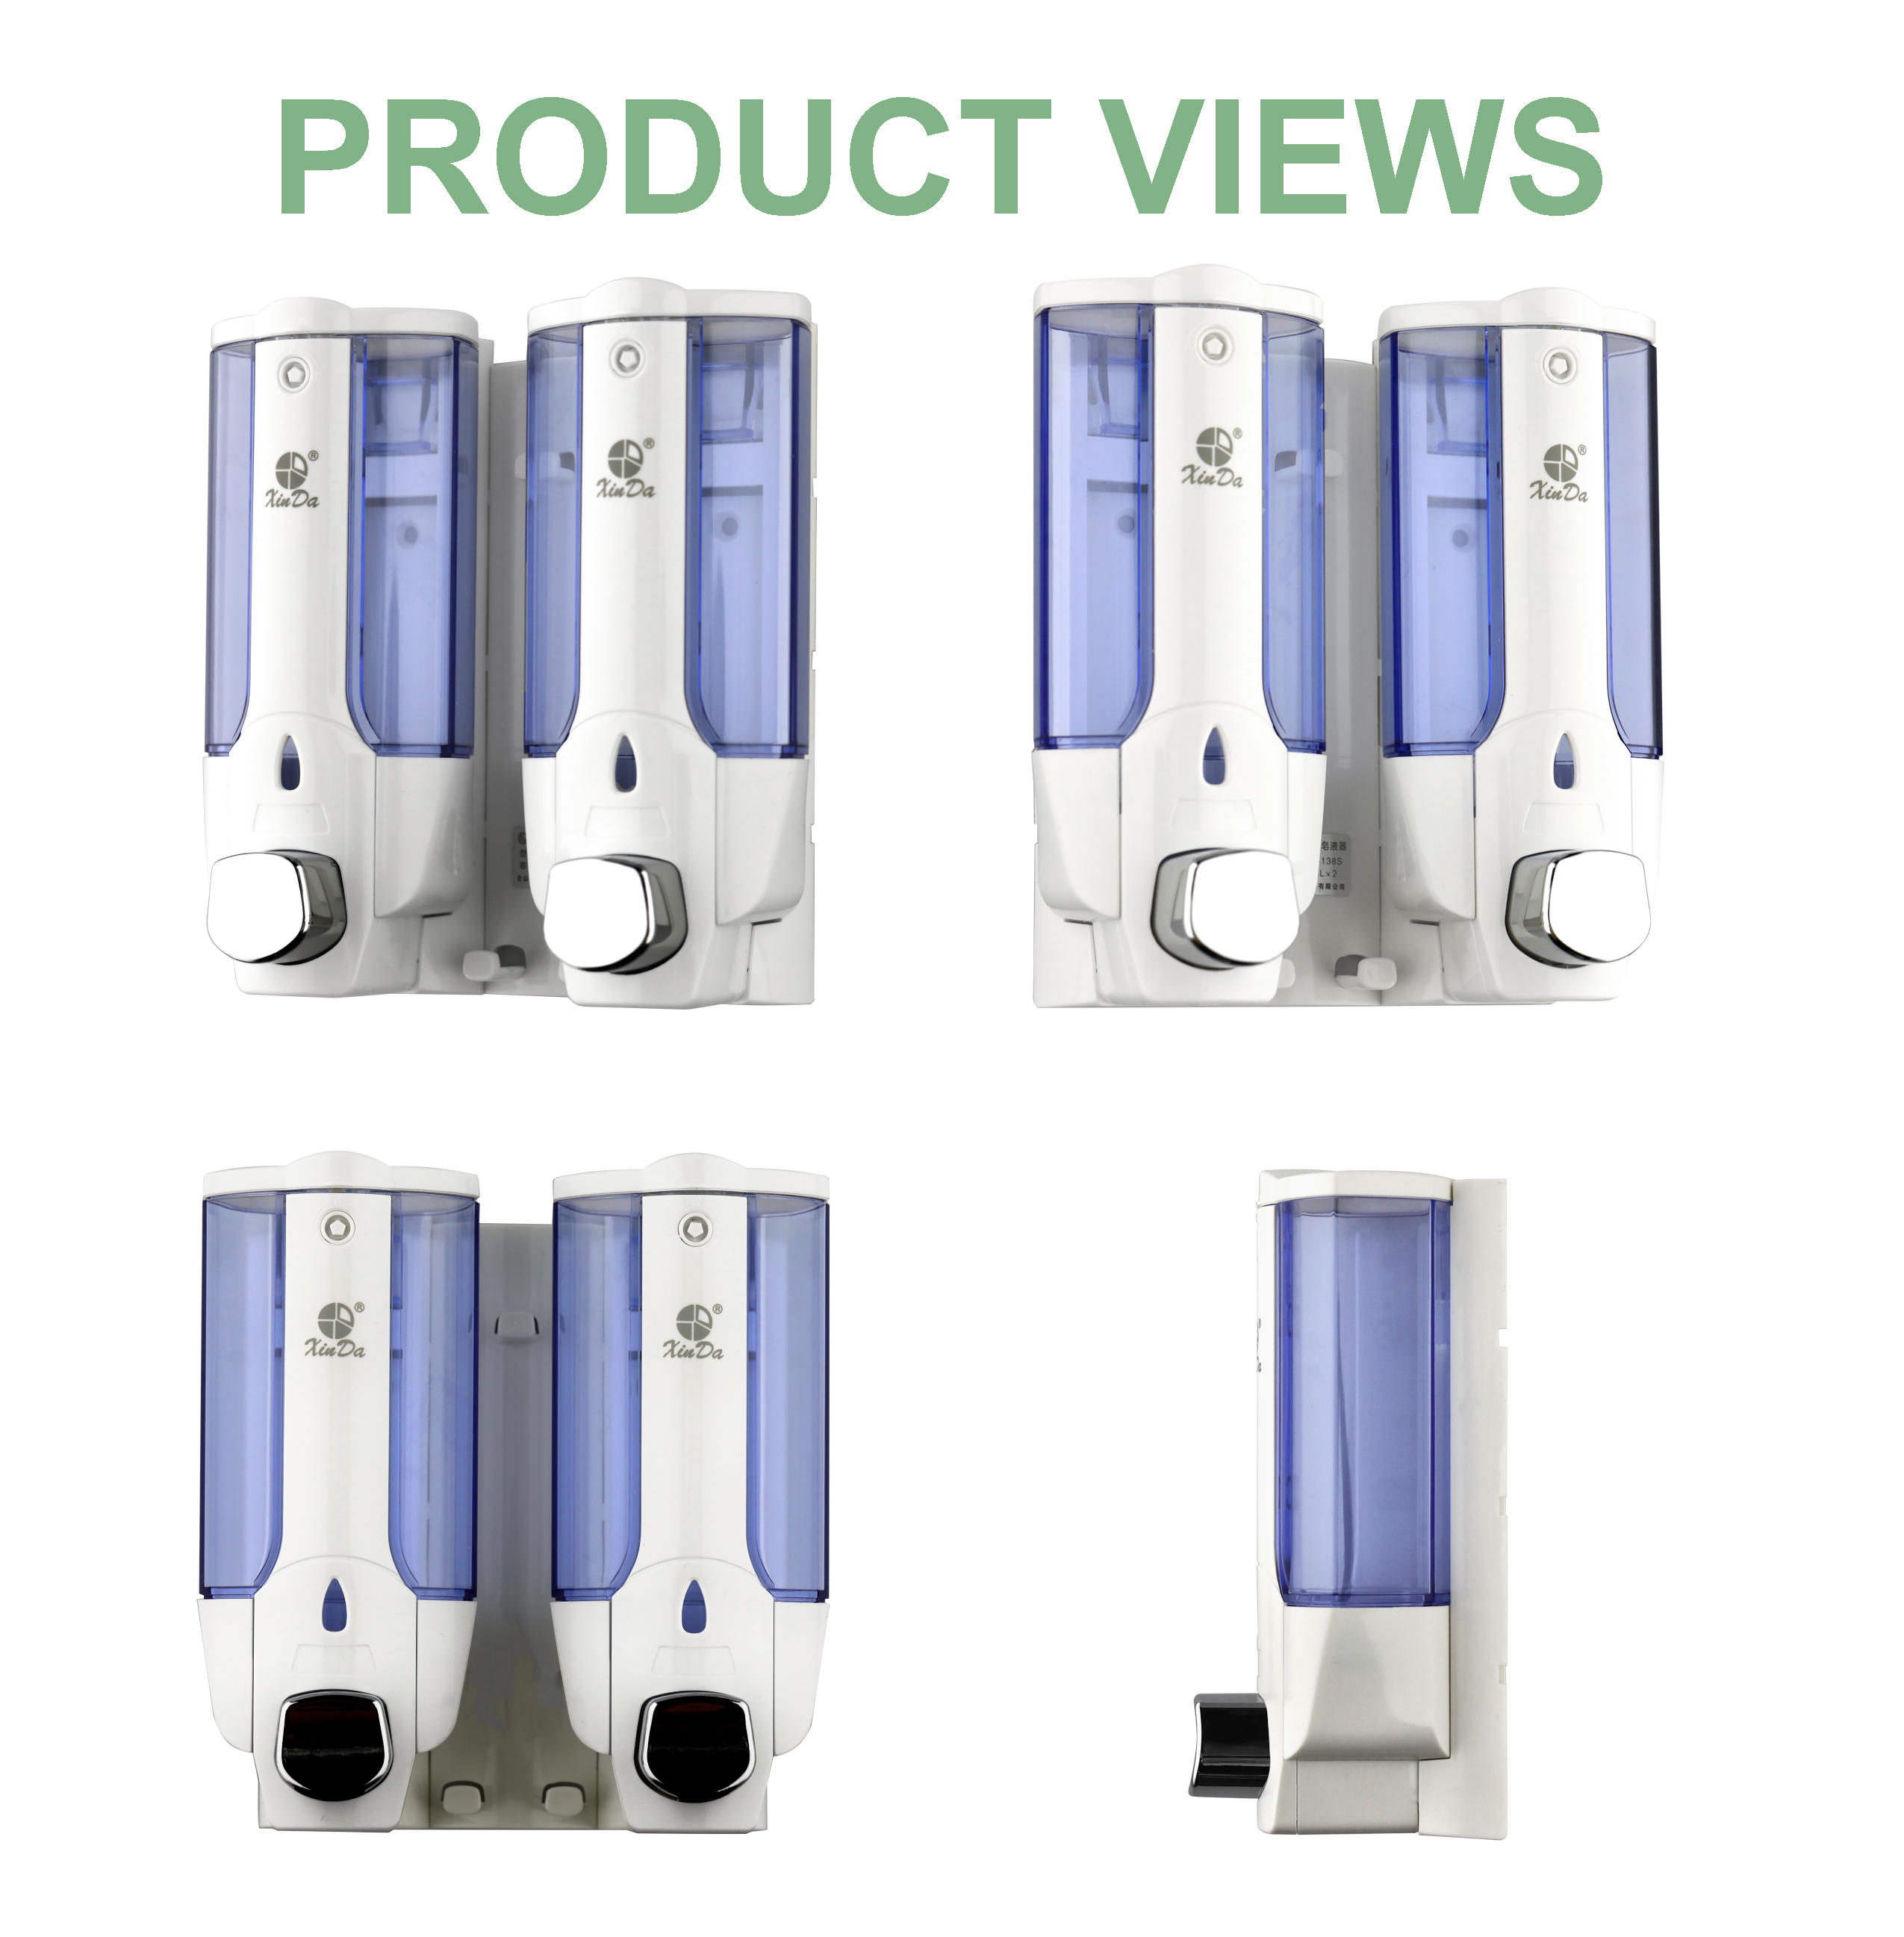 The XinDa ZYQ138s Wall Mounted Hands Free Auto Soap Dispenser Touch Less Soap Dispenser Soap Dispenser